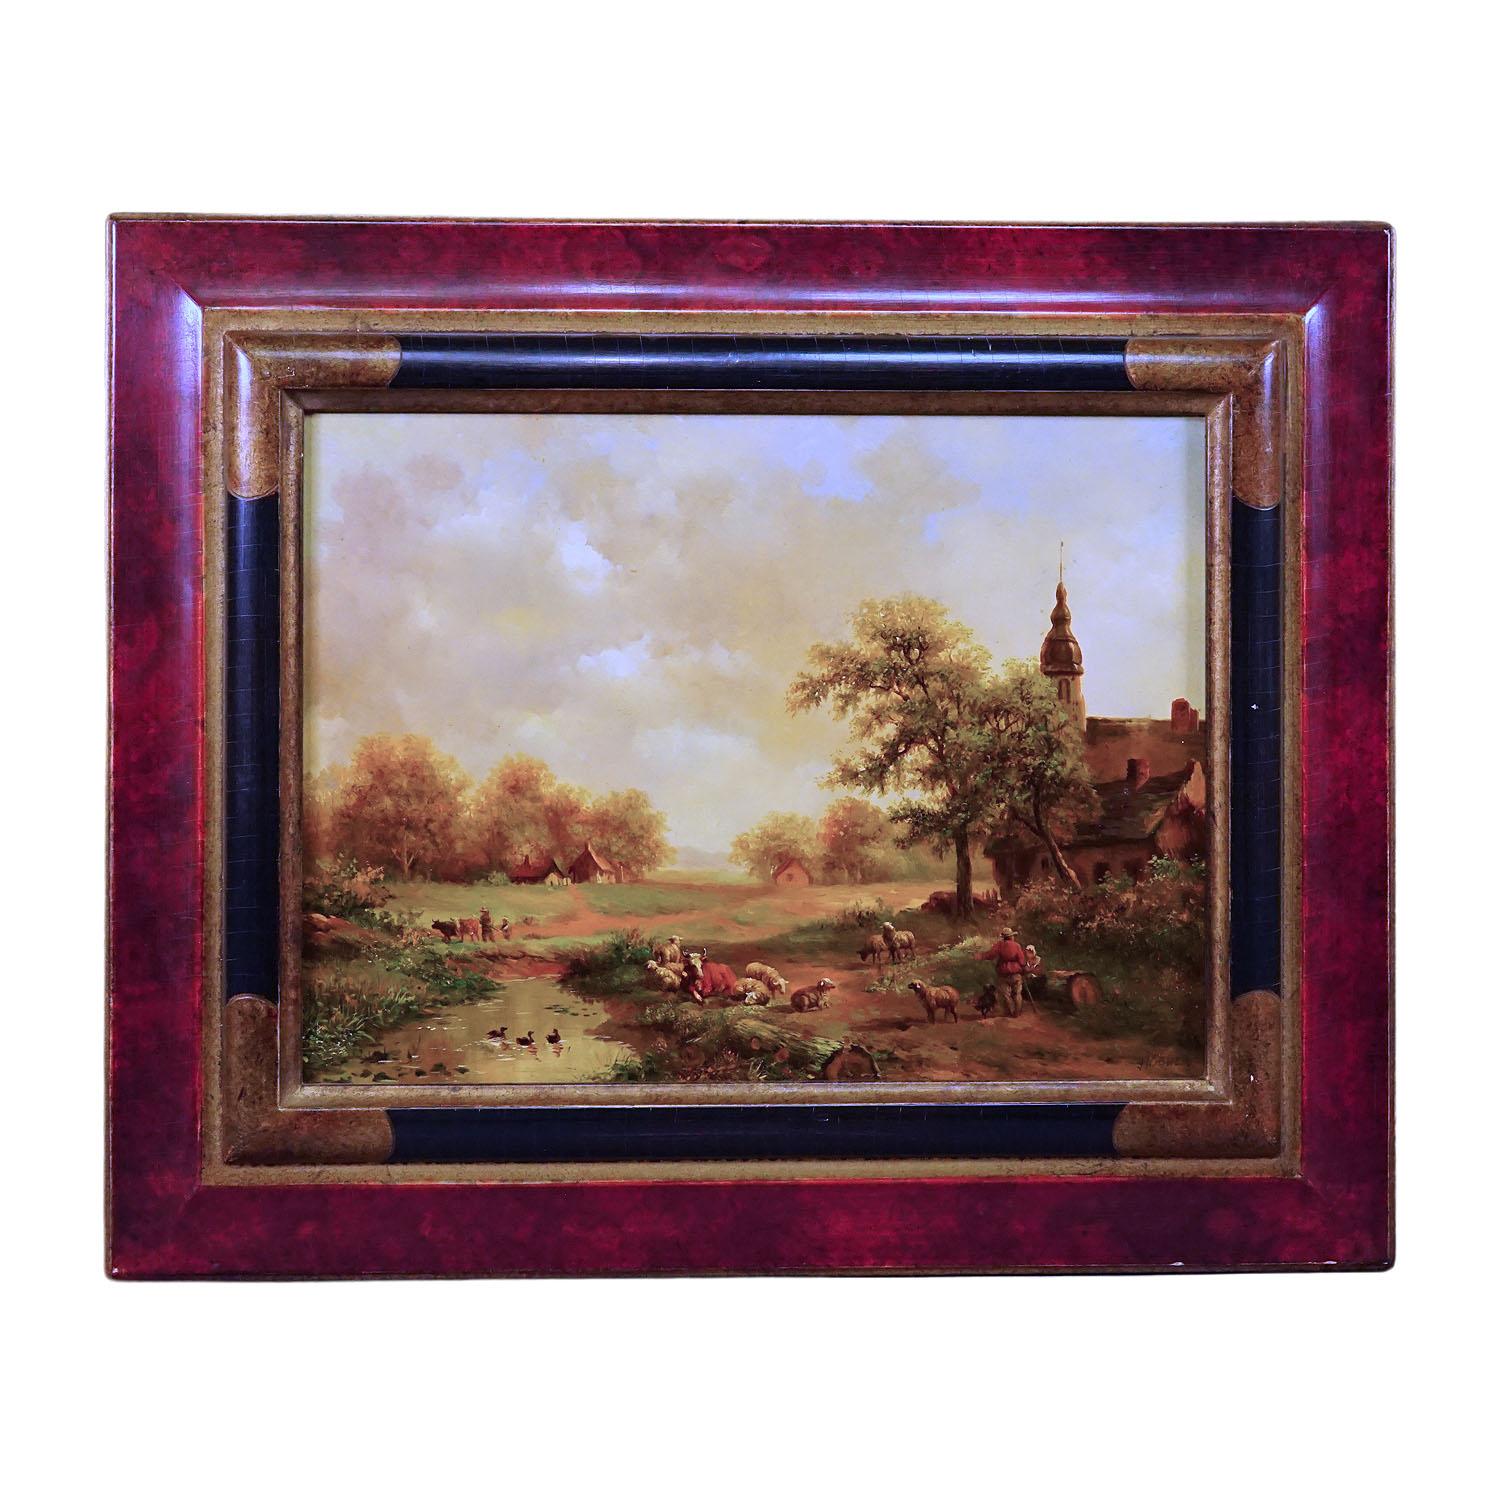 Shepherd with Herd in a Victorian Landscape, Oil on Wood 19th century

An original antique oil painting showing a shepherd with his sheeps and cows resting on a pond. Painted in oil on wood, signed Huebner. A great original Biedermeier style